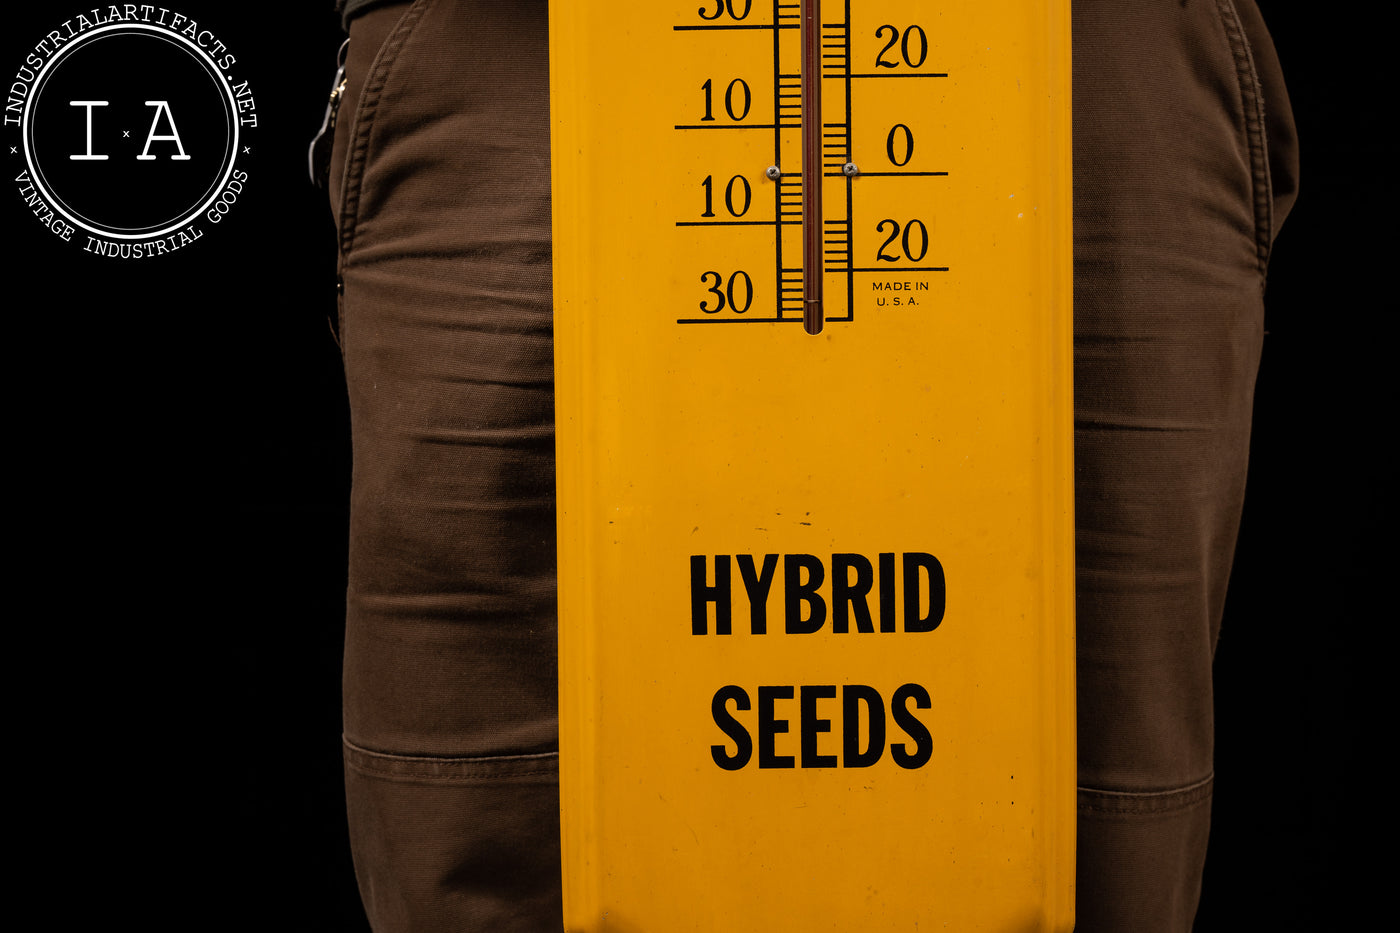 Golden Acres Hybrid Seeds Thermometer